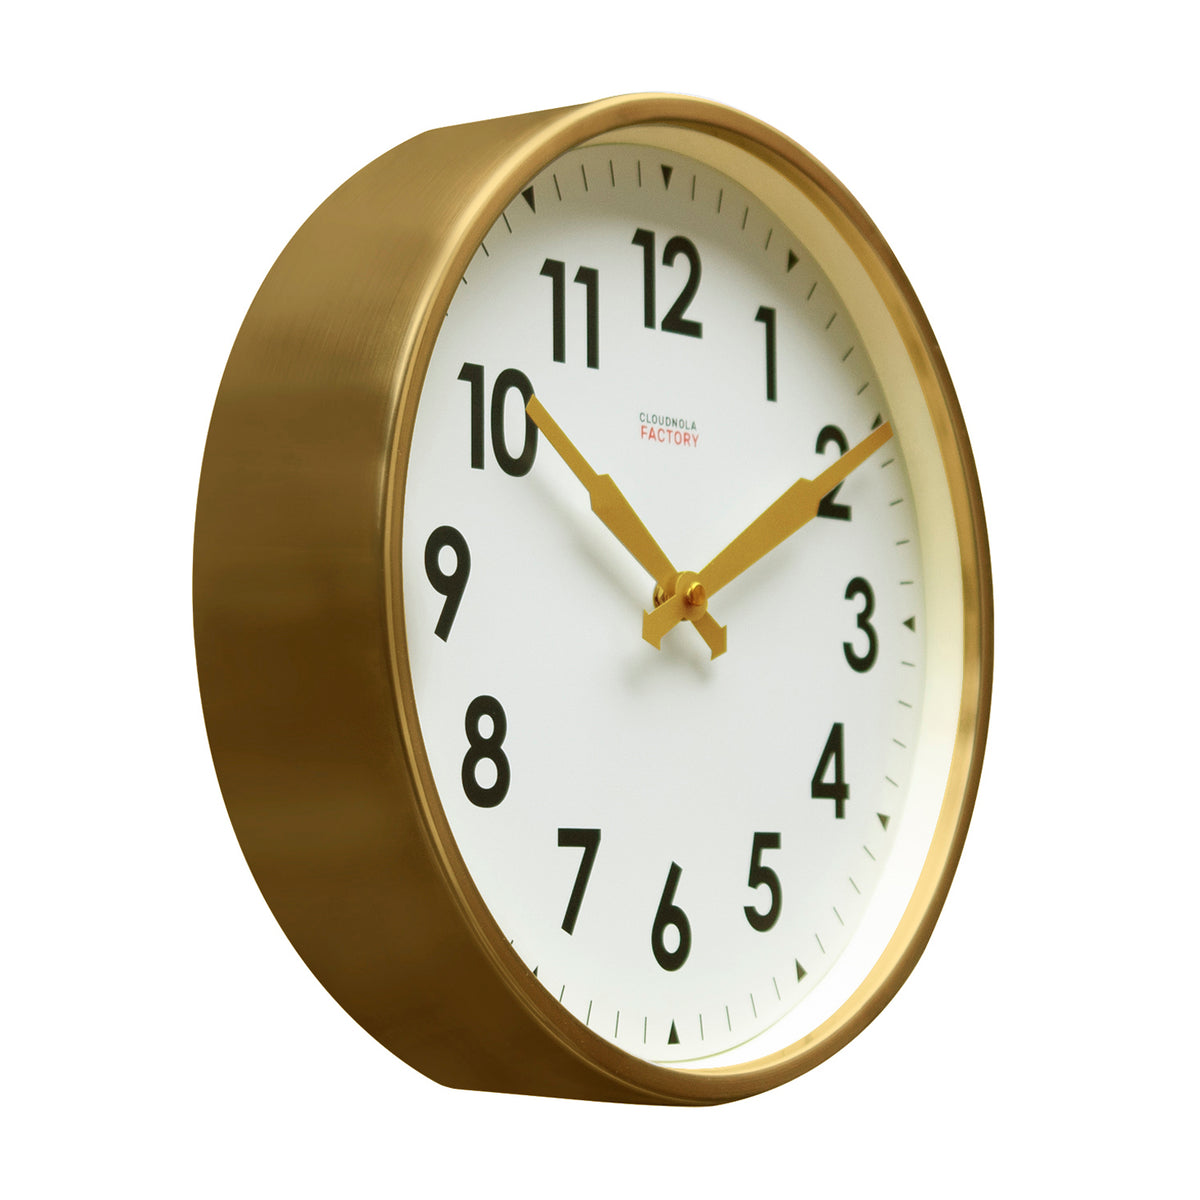 Factory Station Clock - Brushed Gold- made by Cloudnola